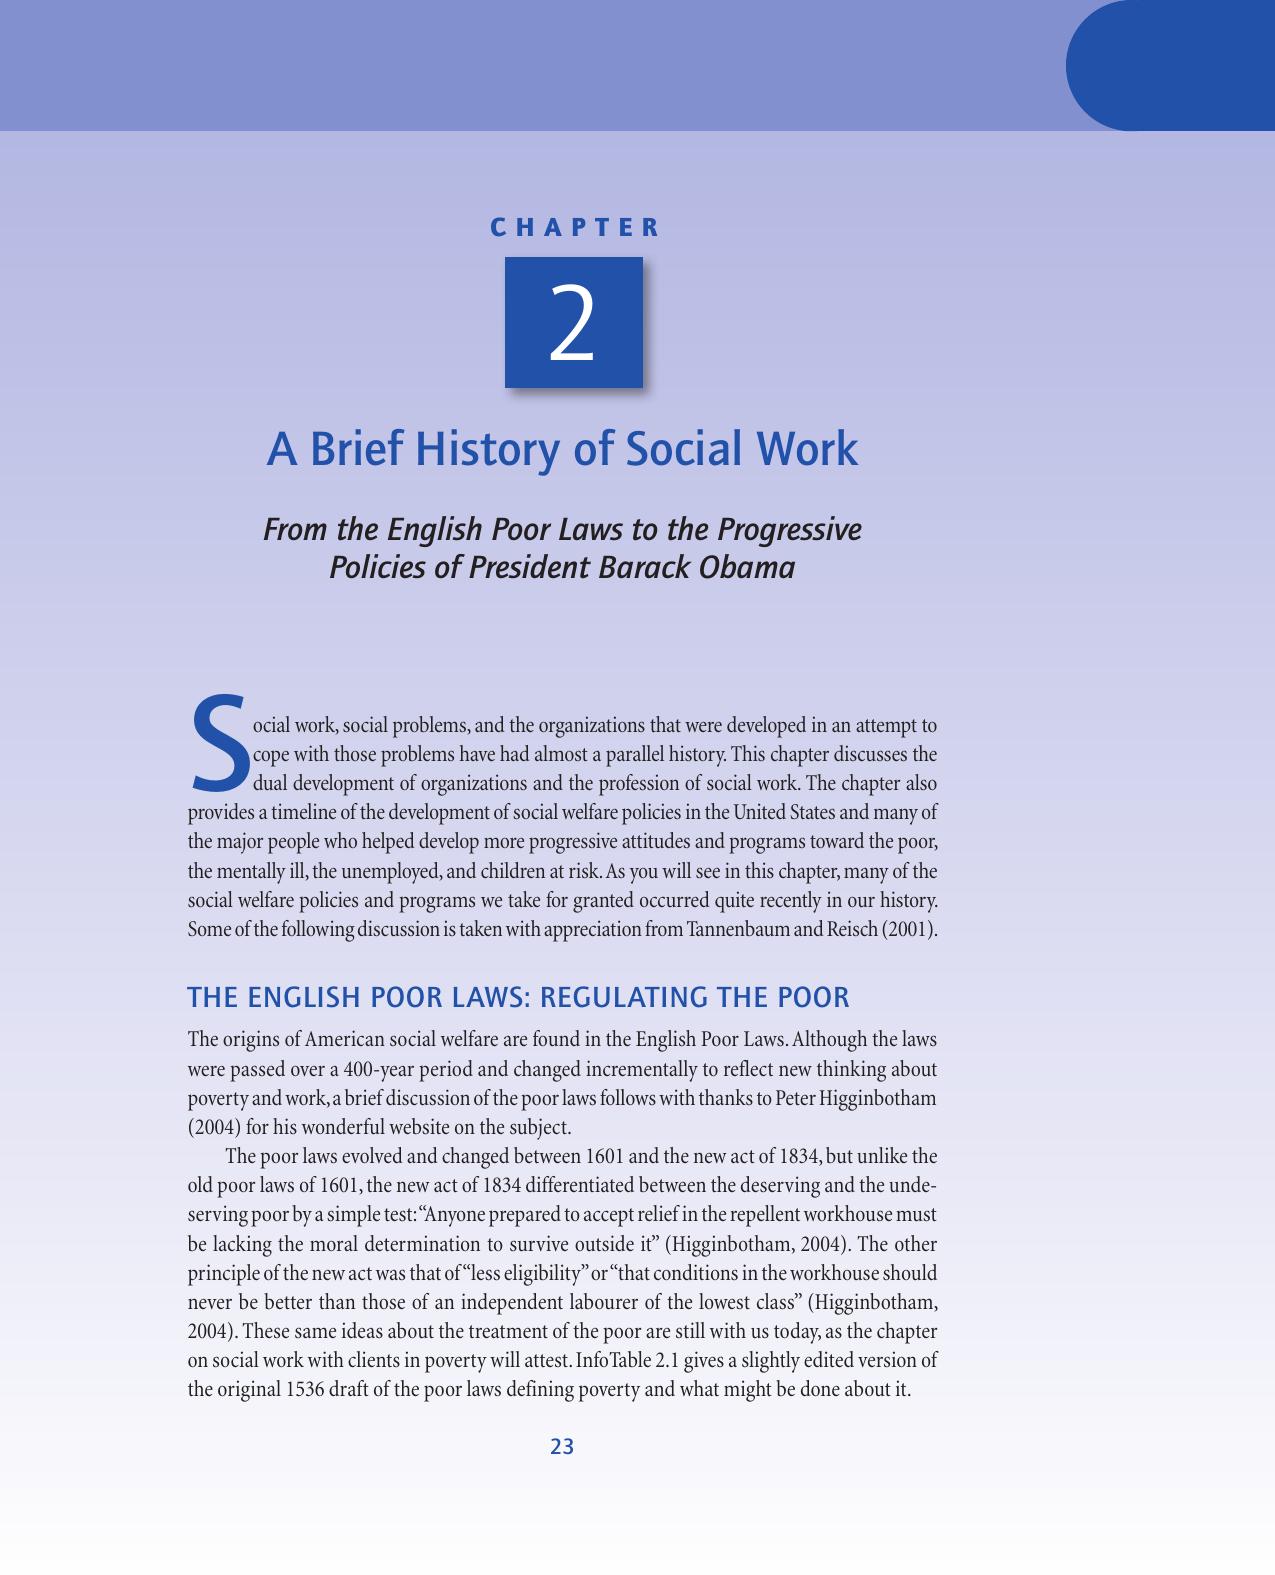 A Brief History of Social Work